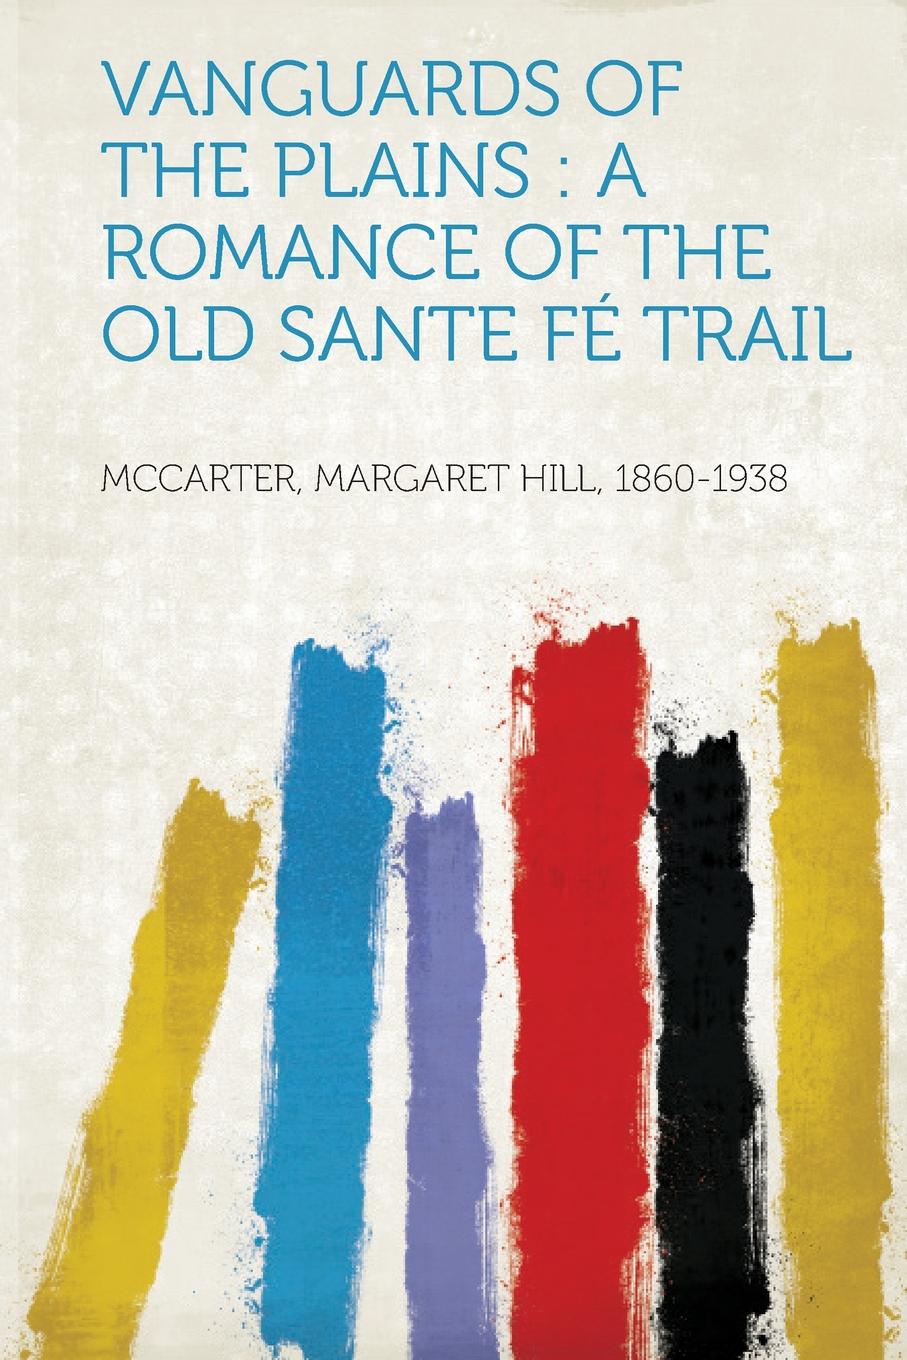 Vanguards of the Plains. A Romance of the Old Sante Fe Trail